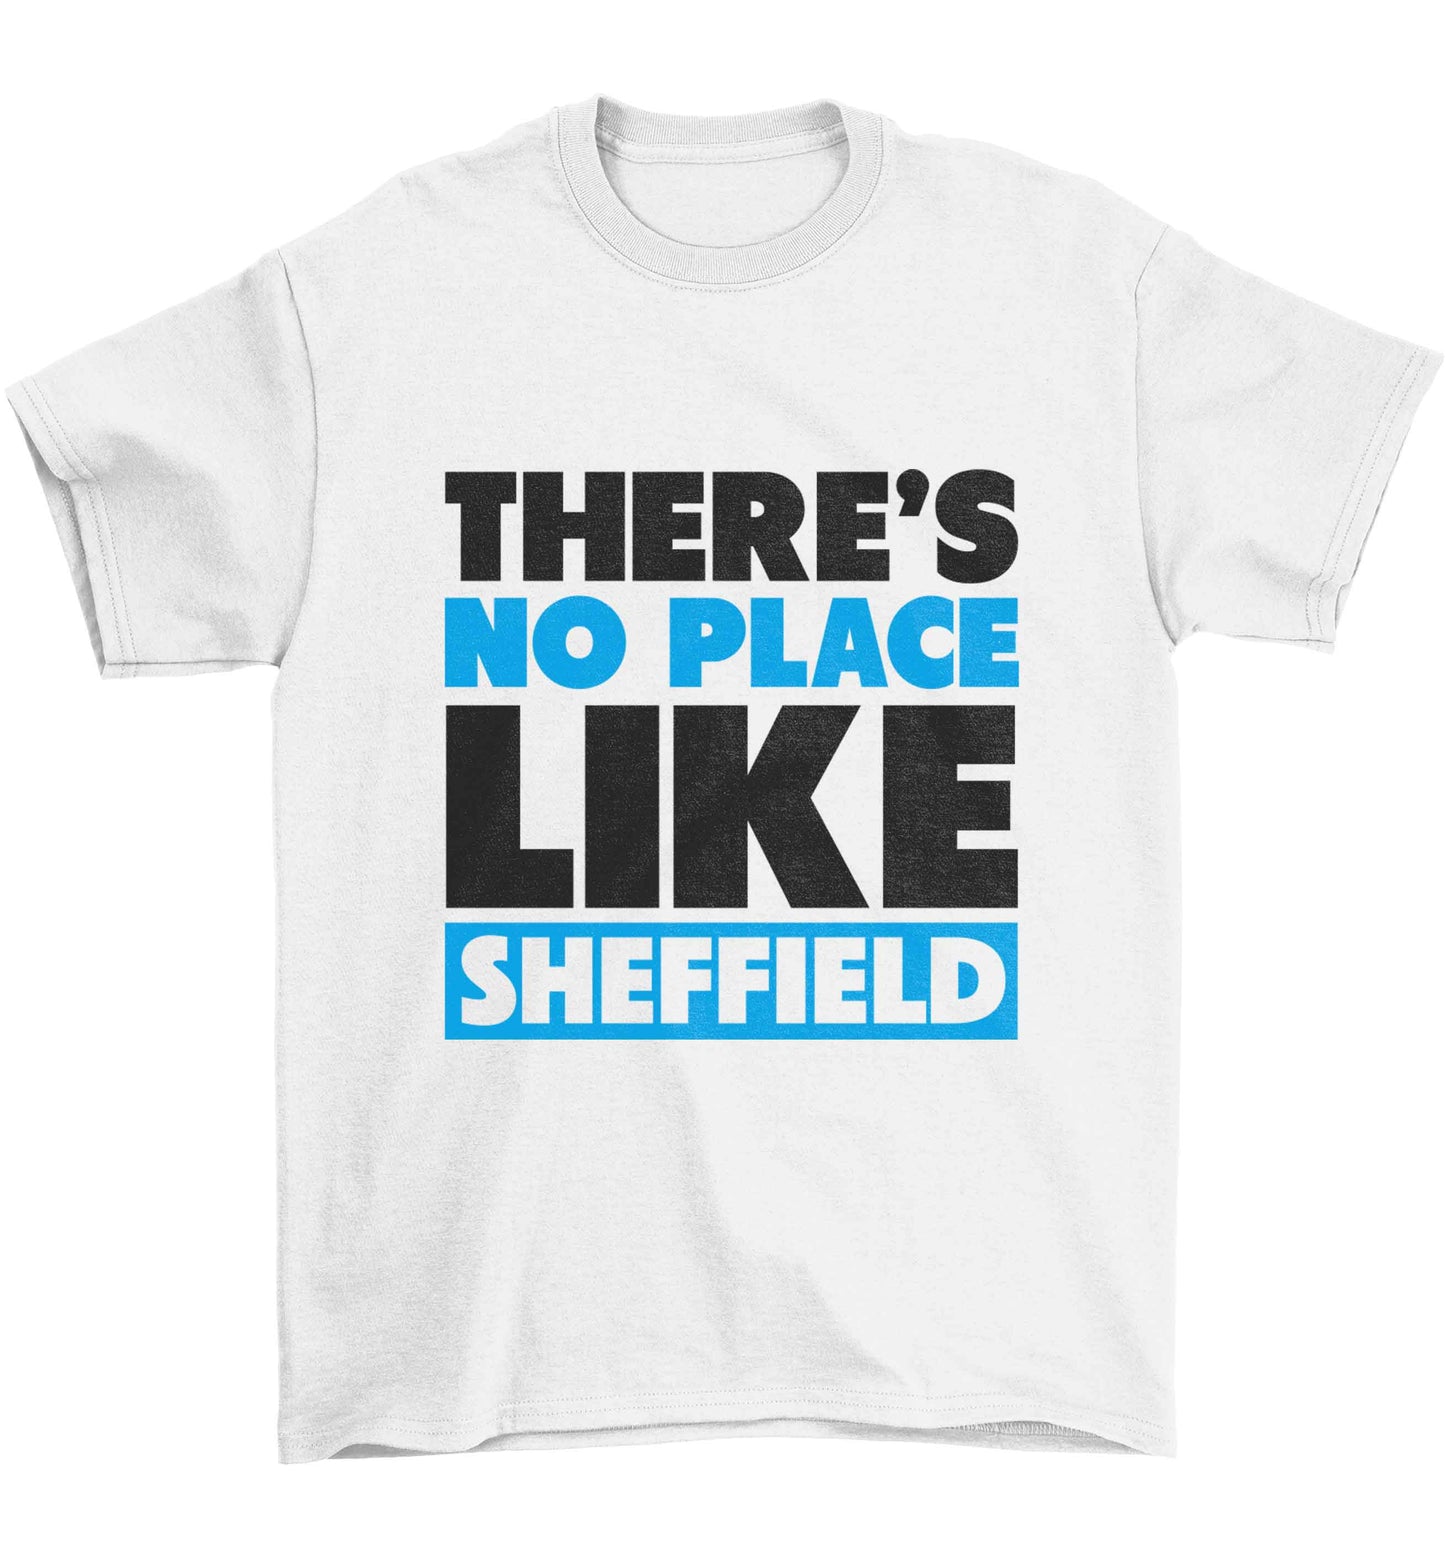 There's no place like Sheffield Children's white Tshirt 12-13 Years